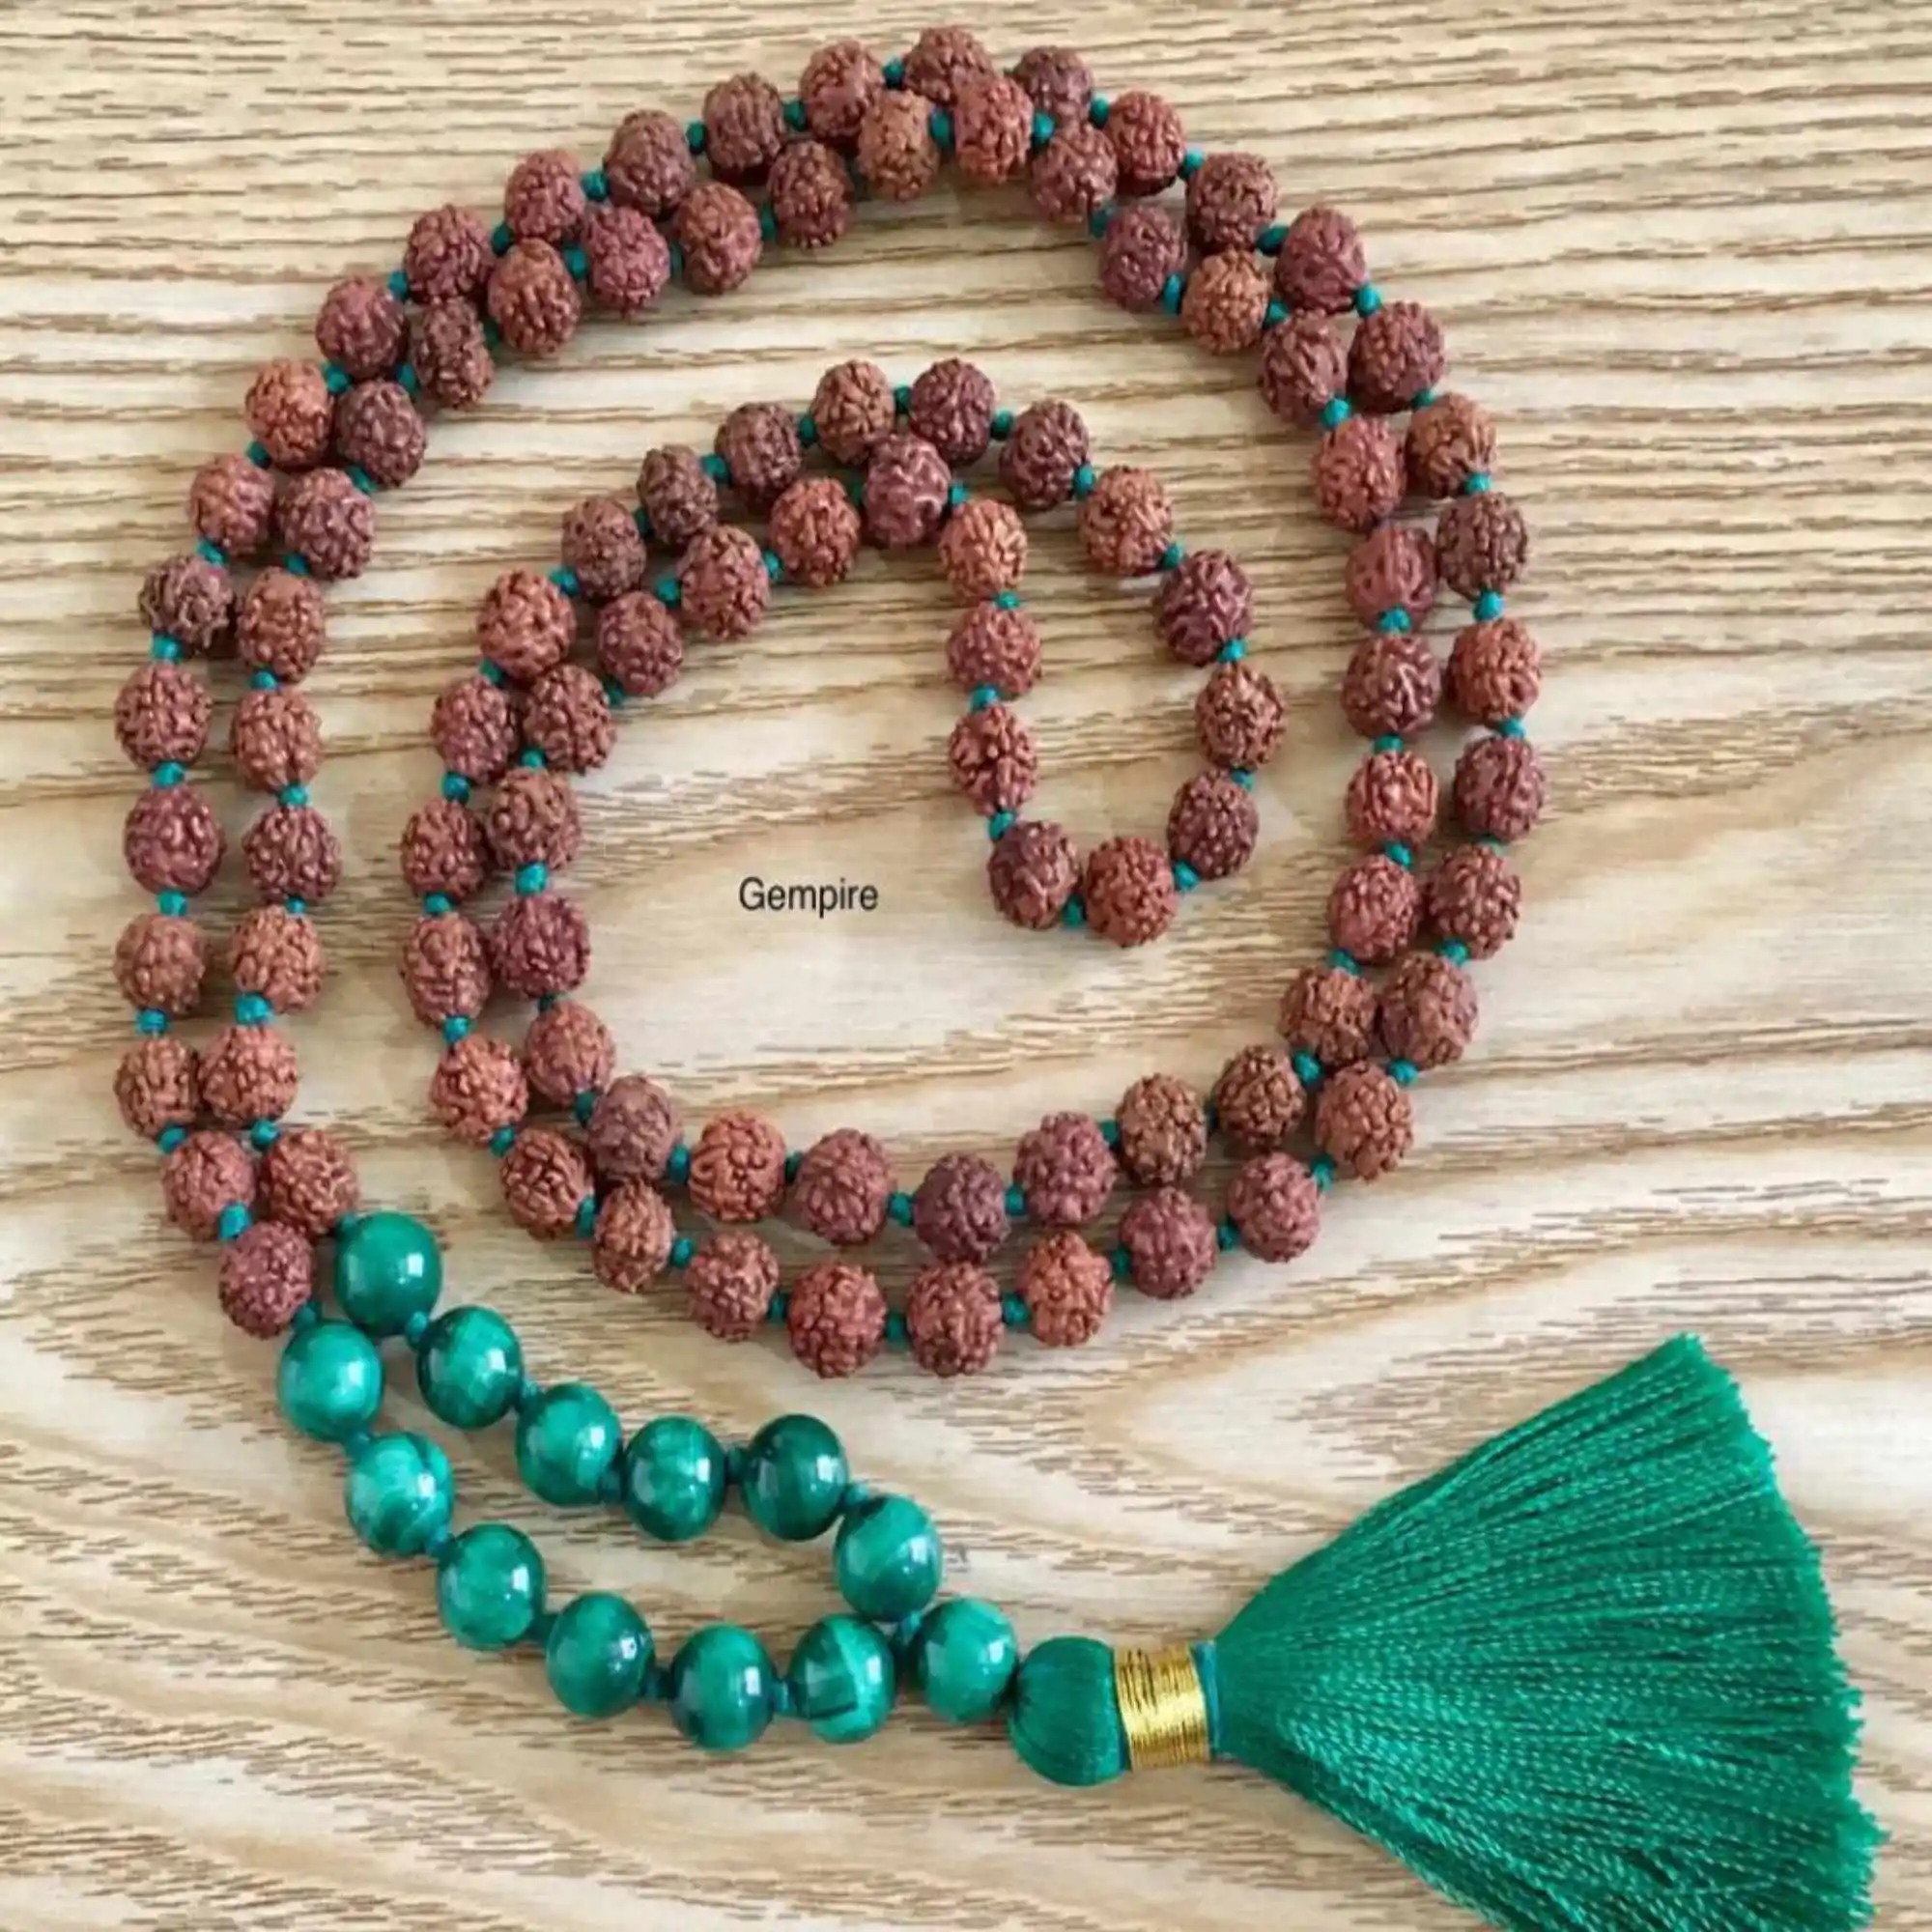 

8mm Natural knot Rudraksha Malachite gemstone beads necklace Easter Practice Yoga Cuff Blessing All Saints' Day Chakra